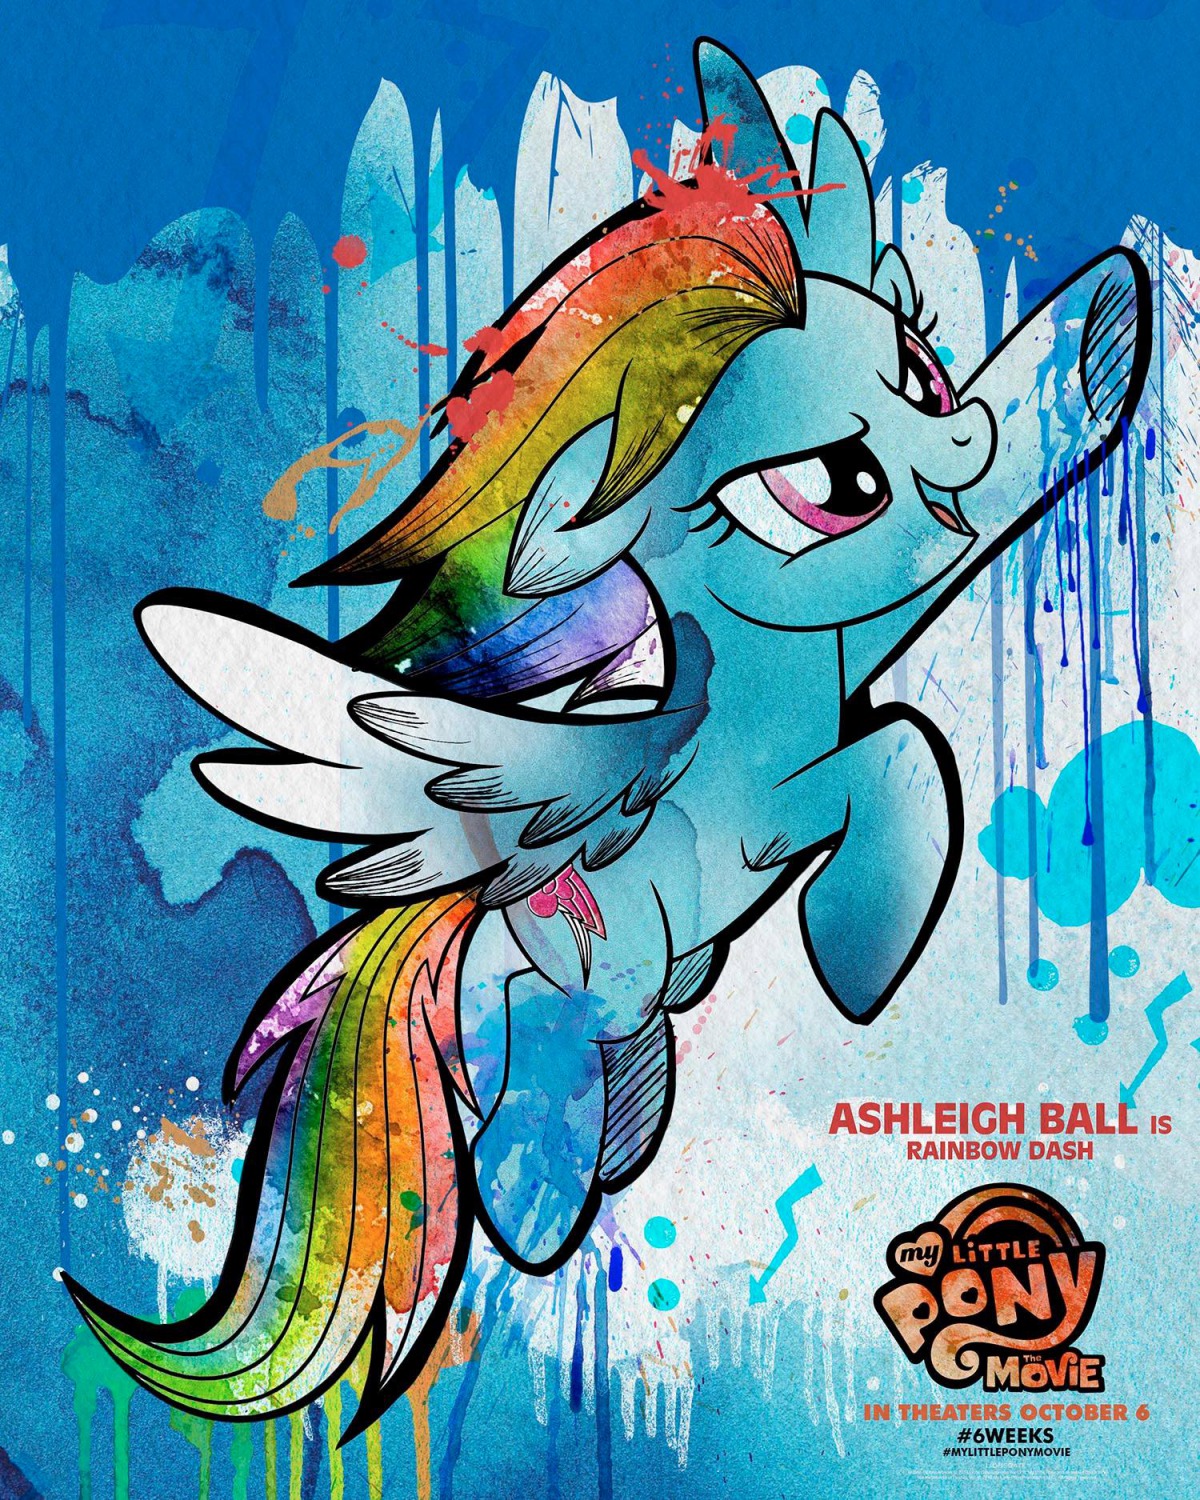 Extra Large Movie Poster Image for My Little Pony: The Movie (#23 of 55)